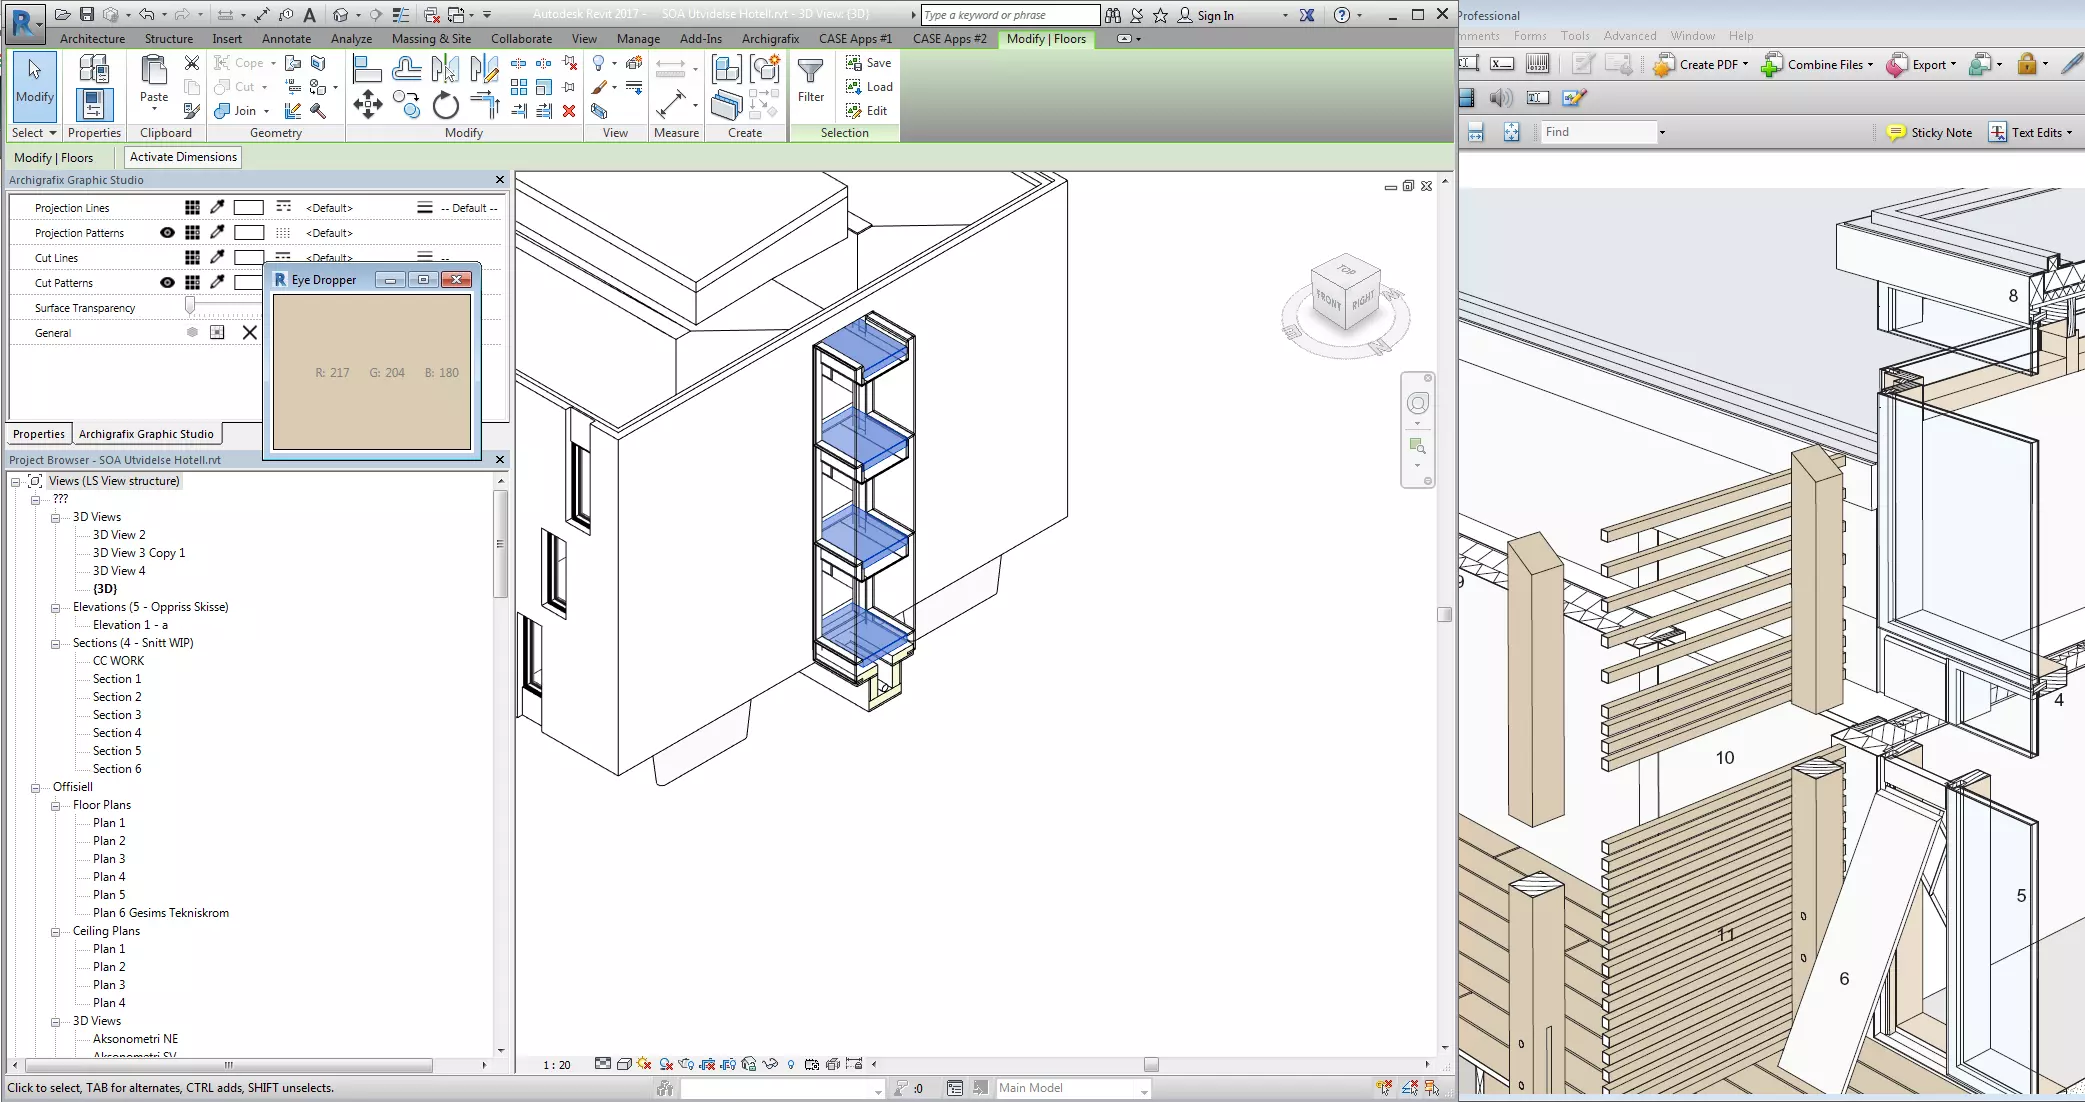 Use the eyedropper to pick colors inside Revit or from other windows. Supports multi-monitor.